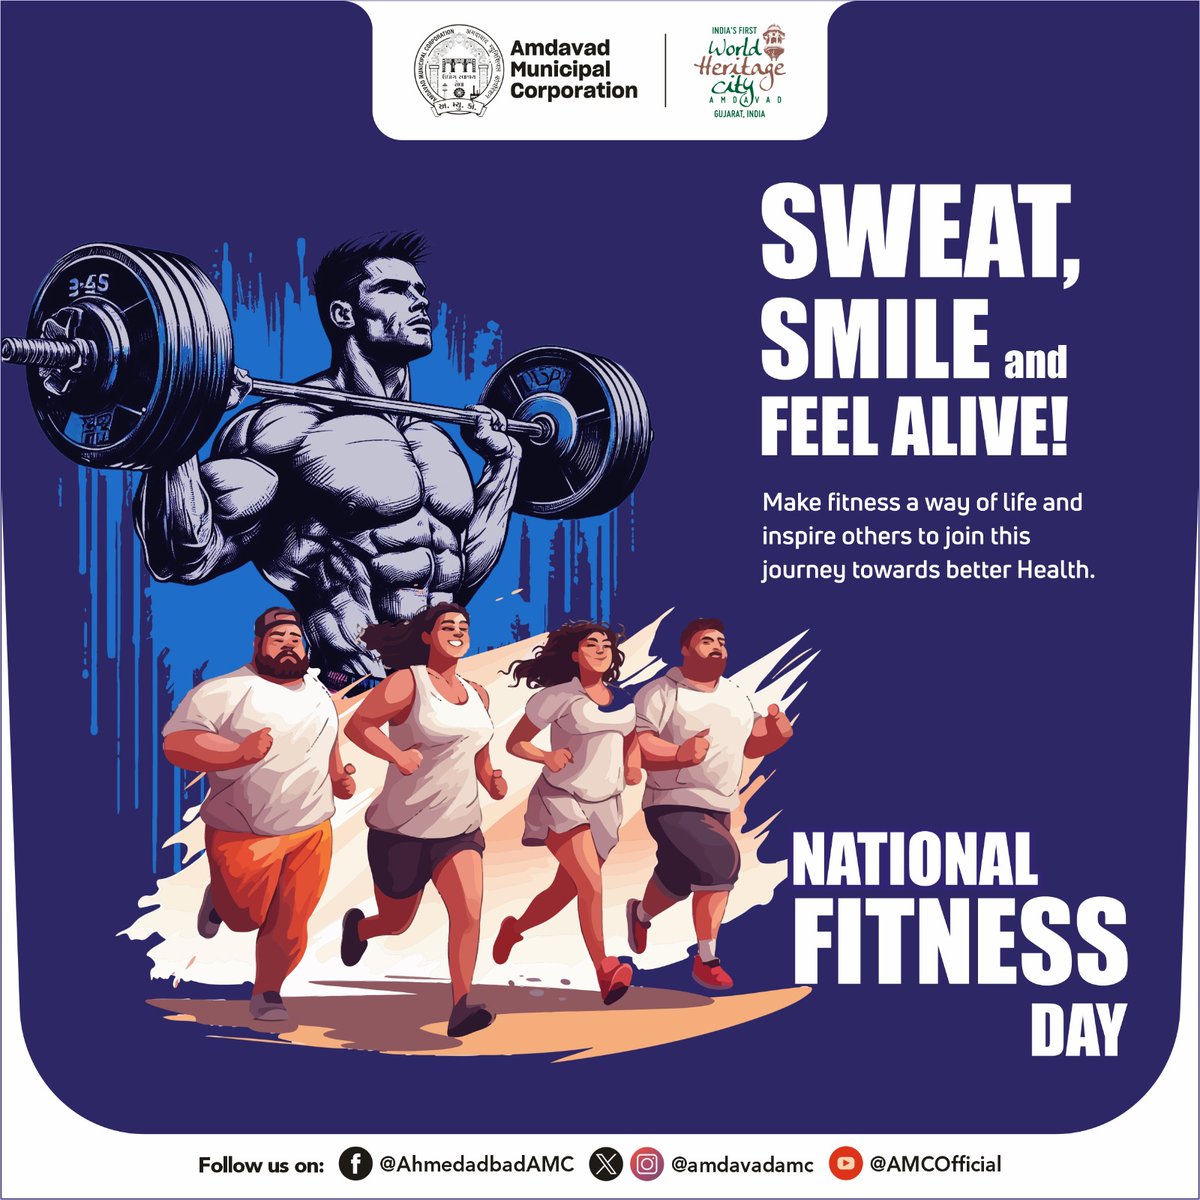 Whether it's hitting the gym, practicing yoga, going for a run, or dancing to your favorite tunes, let's prioritize our physical and mental well-being. 
(1/2)

#AMC #amcforpeople #NationalFitnessDay #Ahmedabad #municipalcorporation